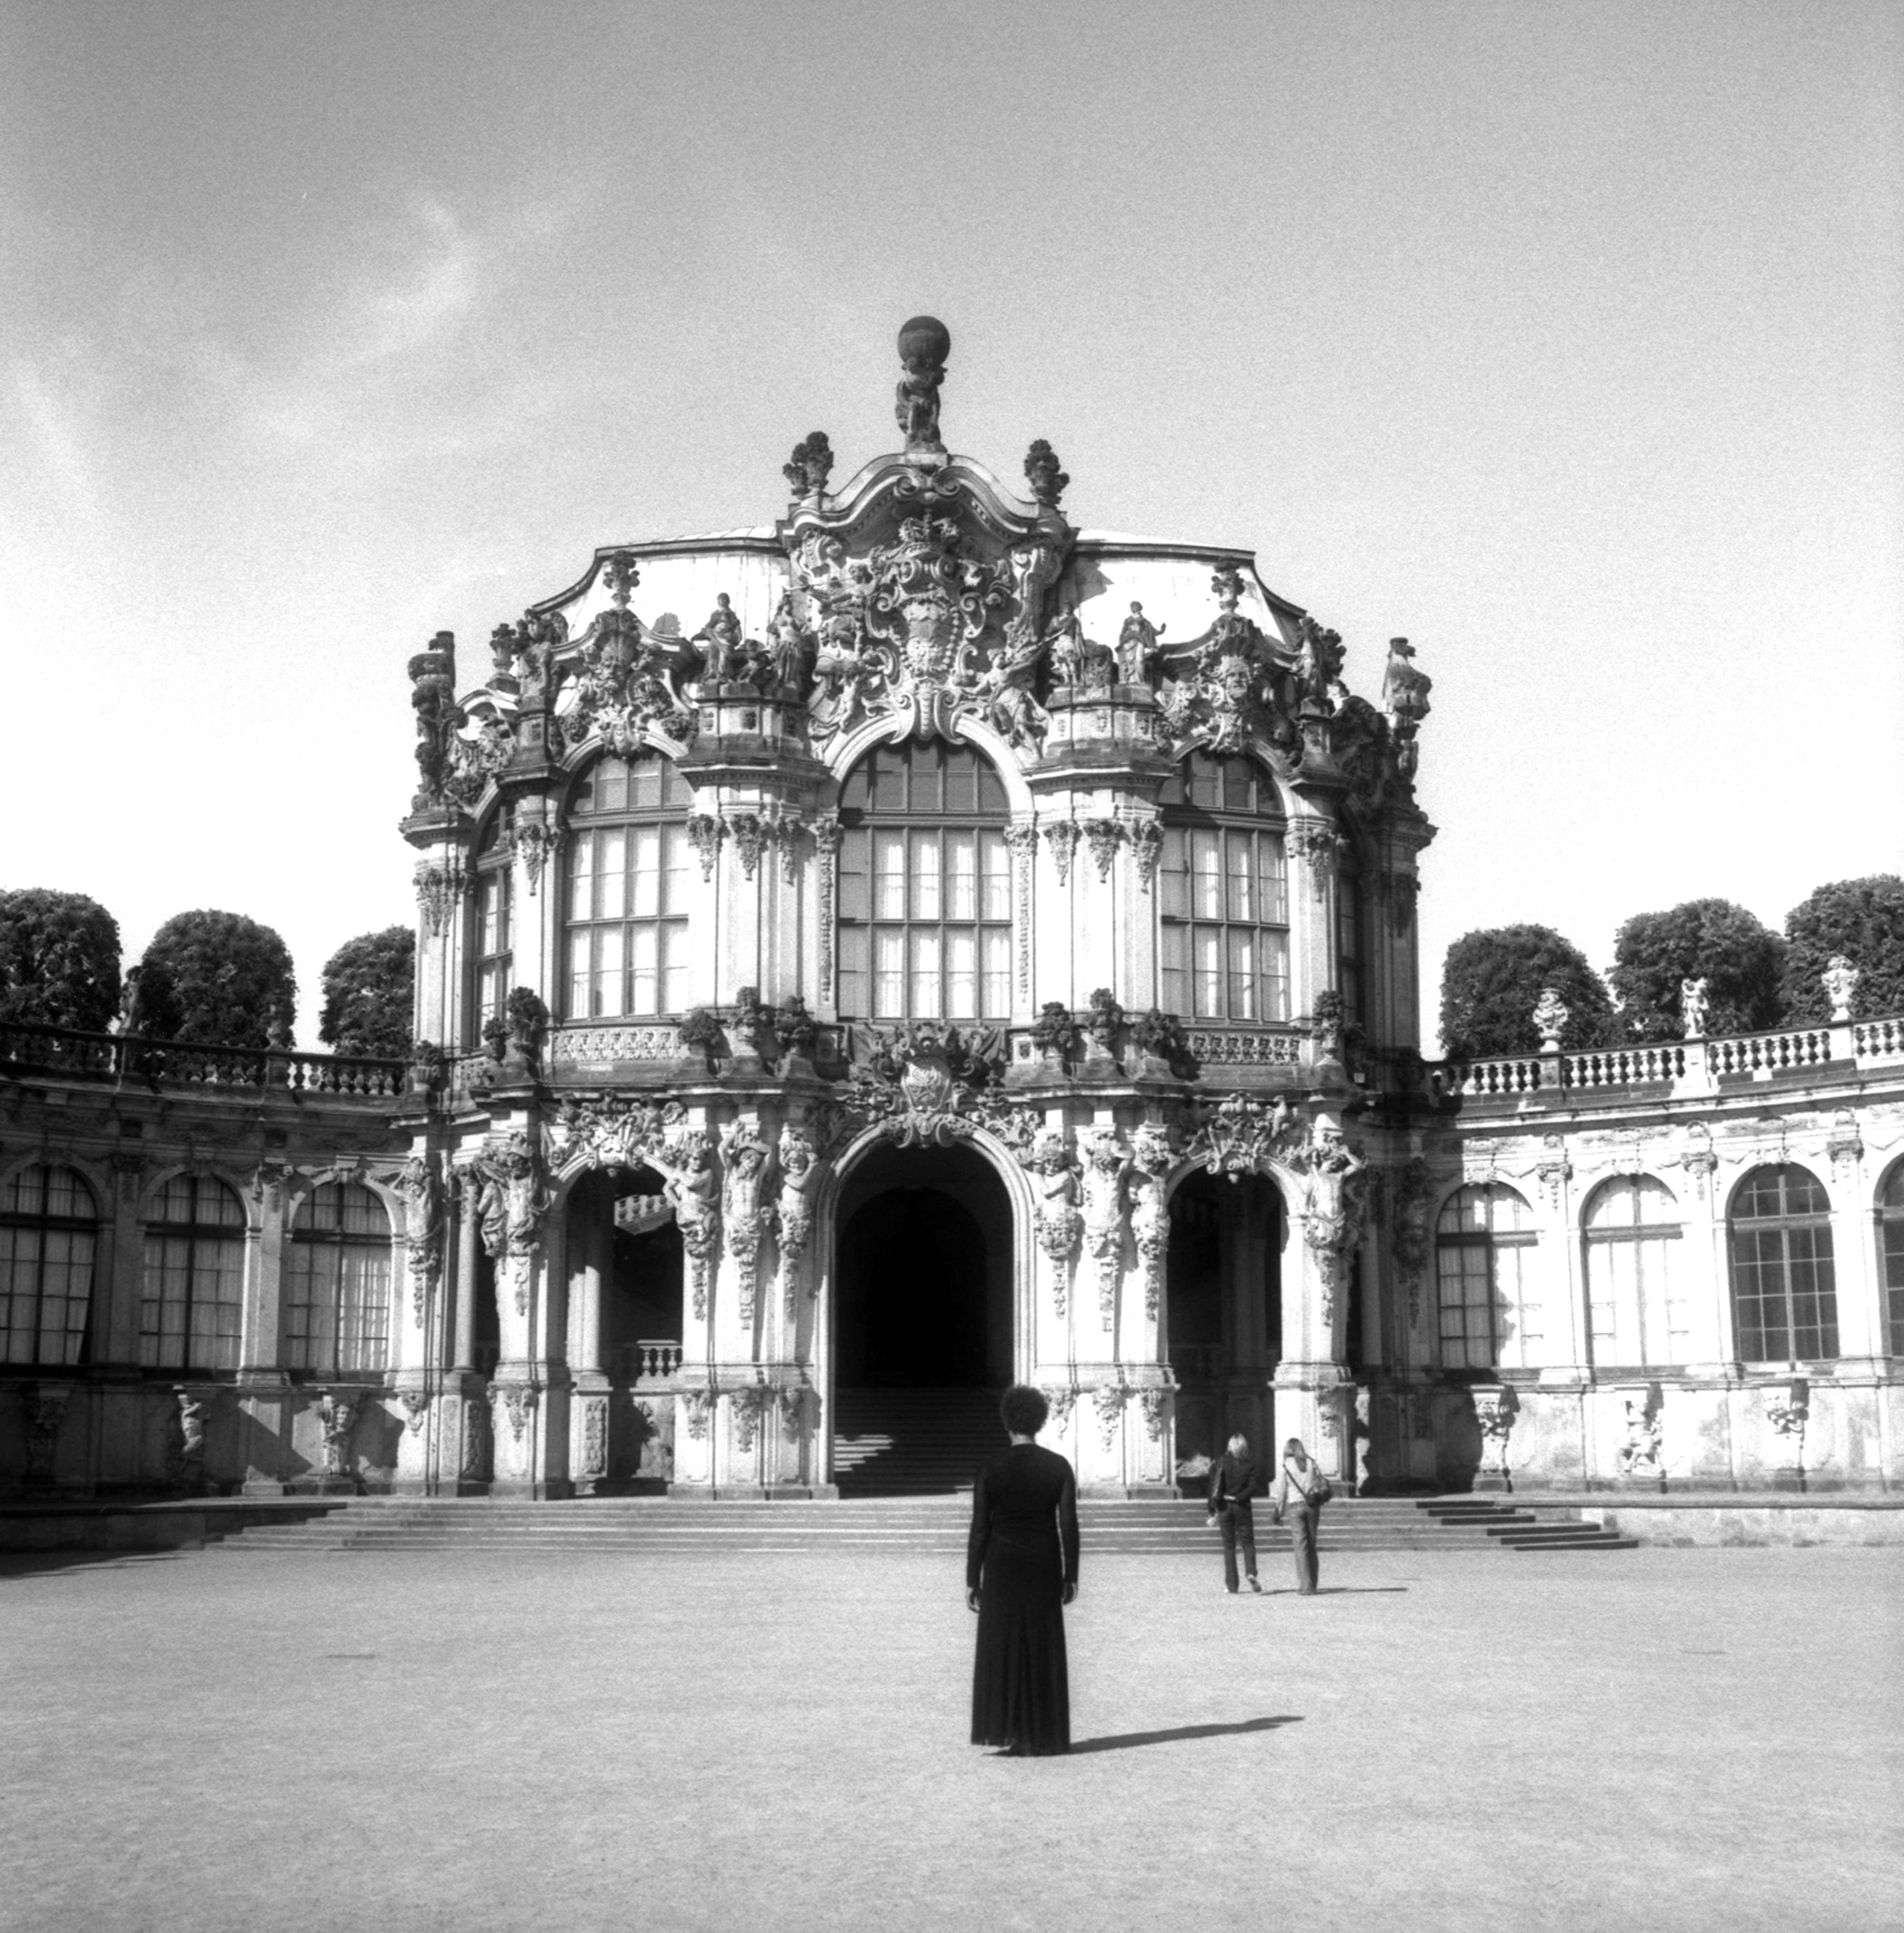 Galerie Barbara Thumm \ Carrie Mae Weems – Push \ Zwinger Palace (2006)